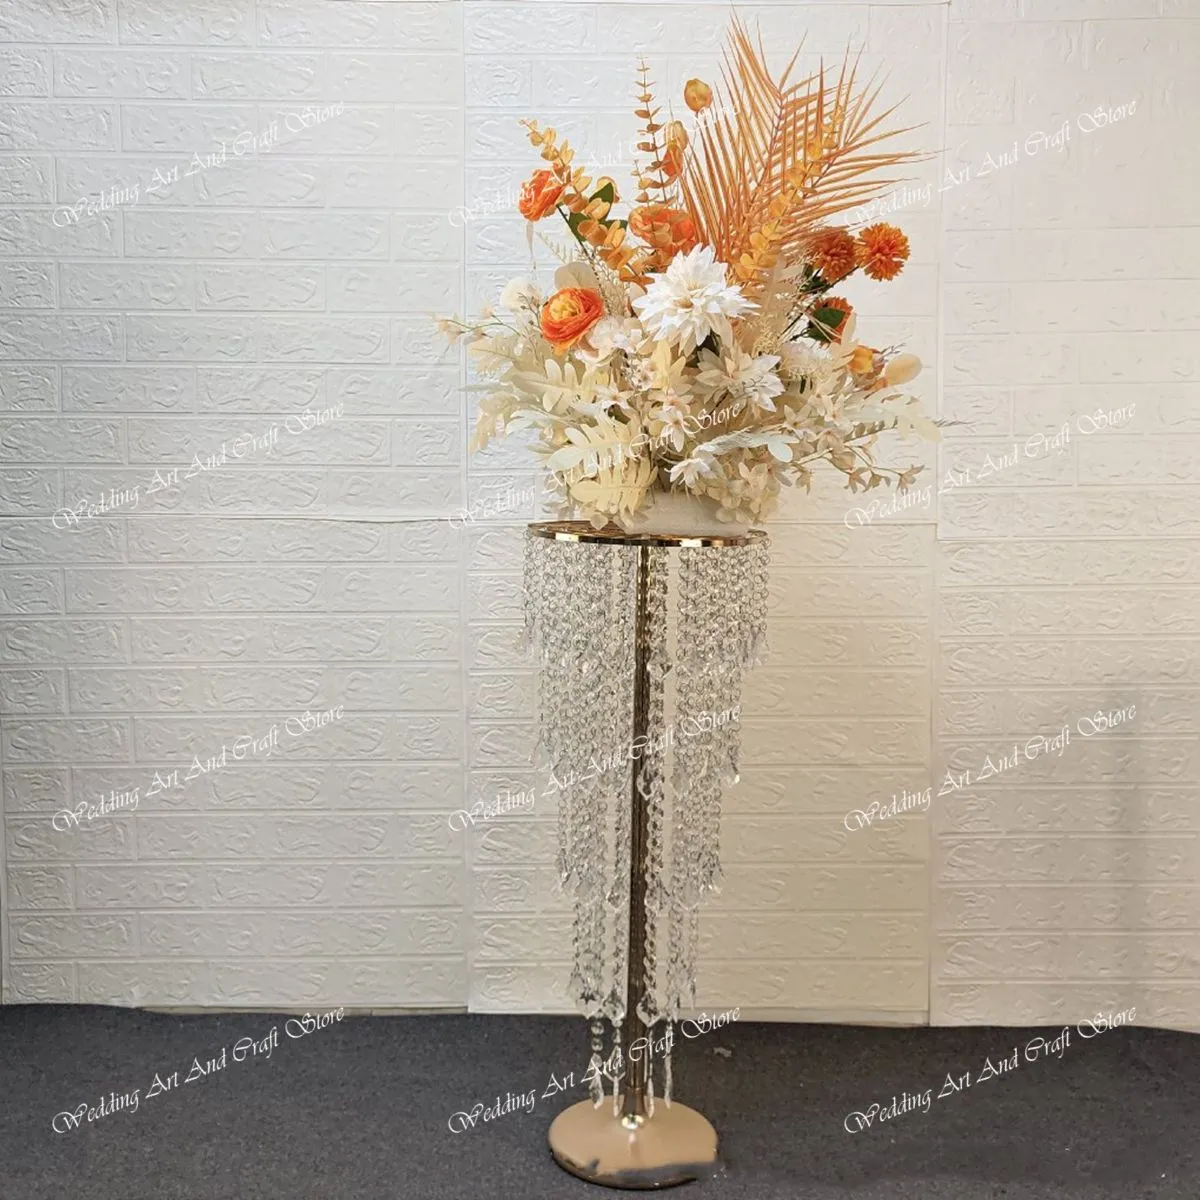 Tall Wedding Centerpieces Gold Vases Crystal Flower Vase, Crystal Metal Silver Flowers Stand For Party Tables Decorations gold pillar walkway